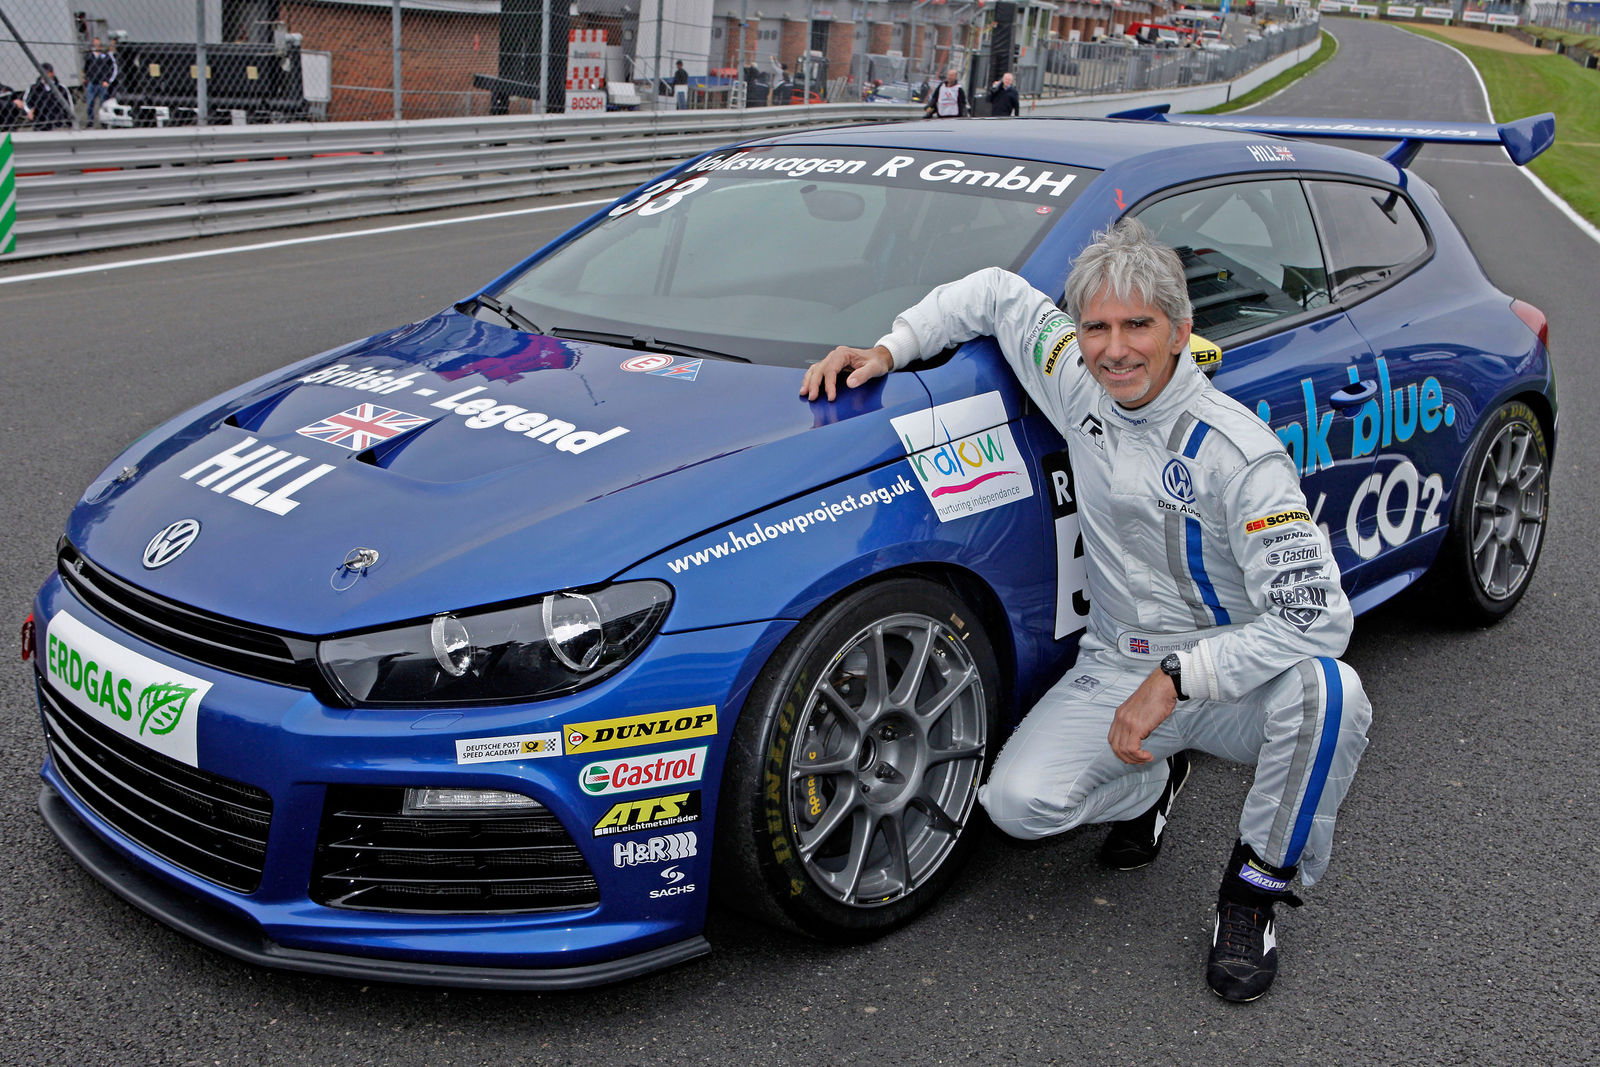 Story: Scirocco historic models